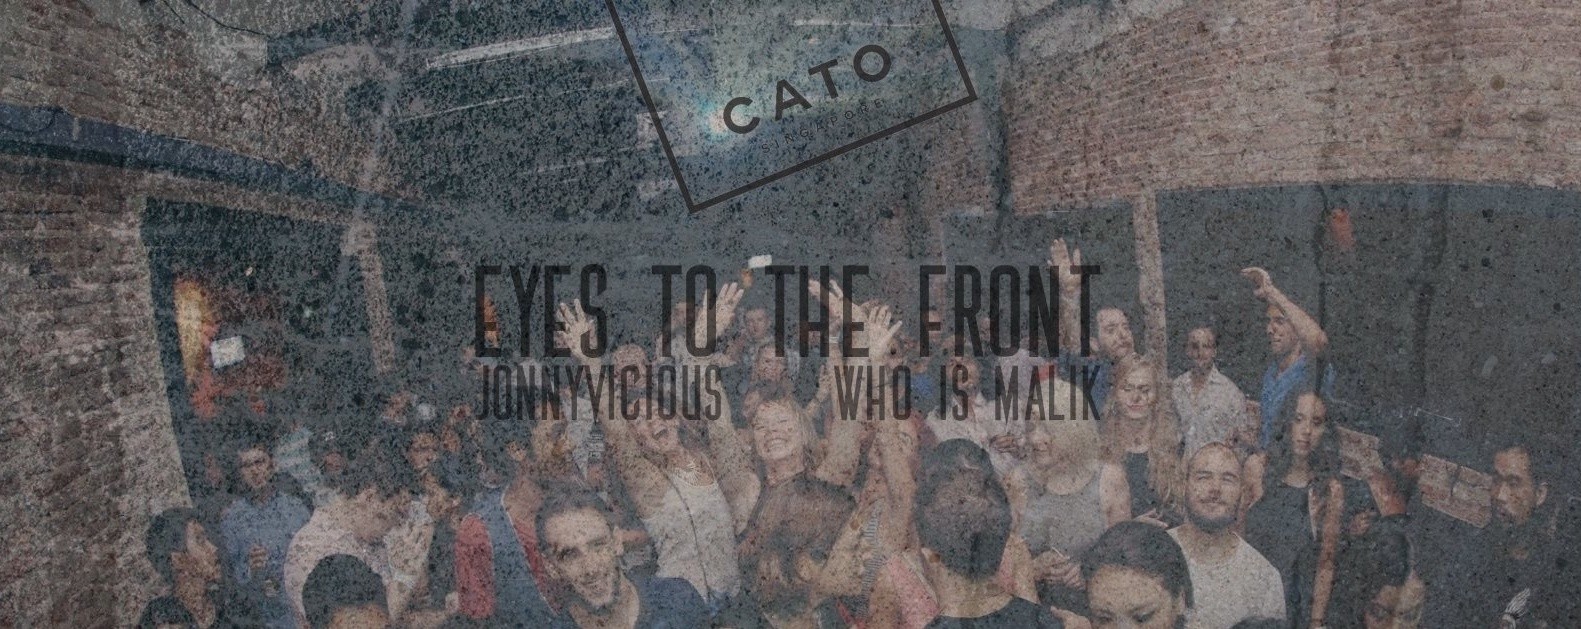 Eyes to the Front - Loft Party